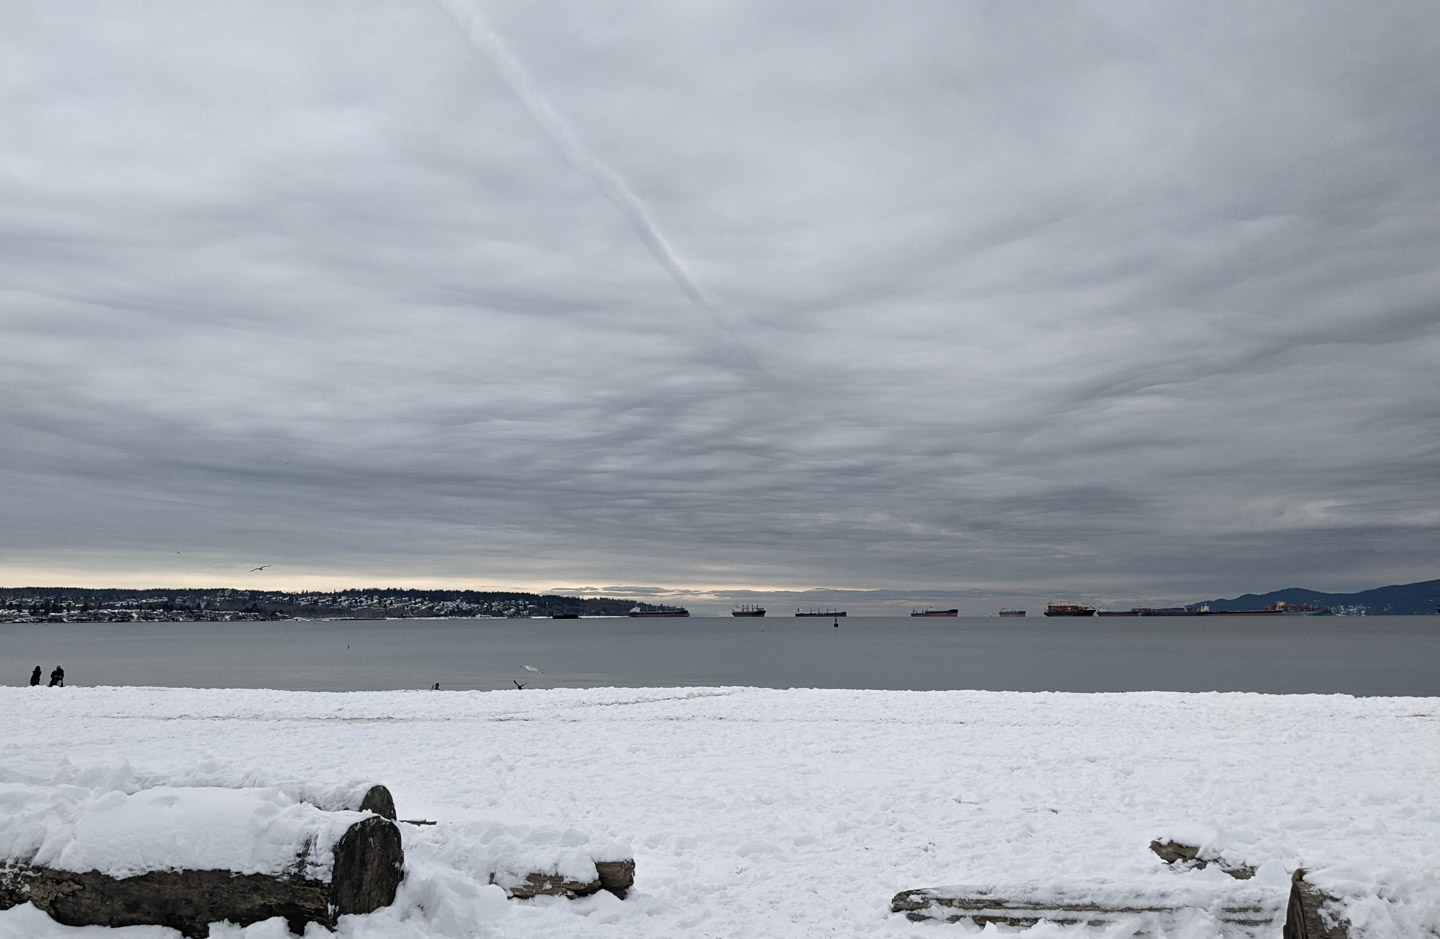 Looking west across English Bay on New Year’s Day 2022